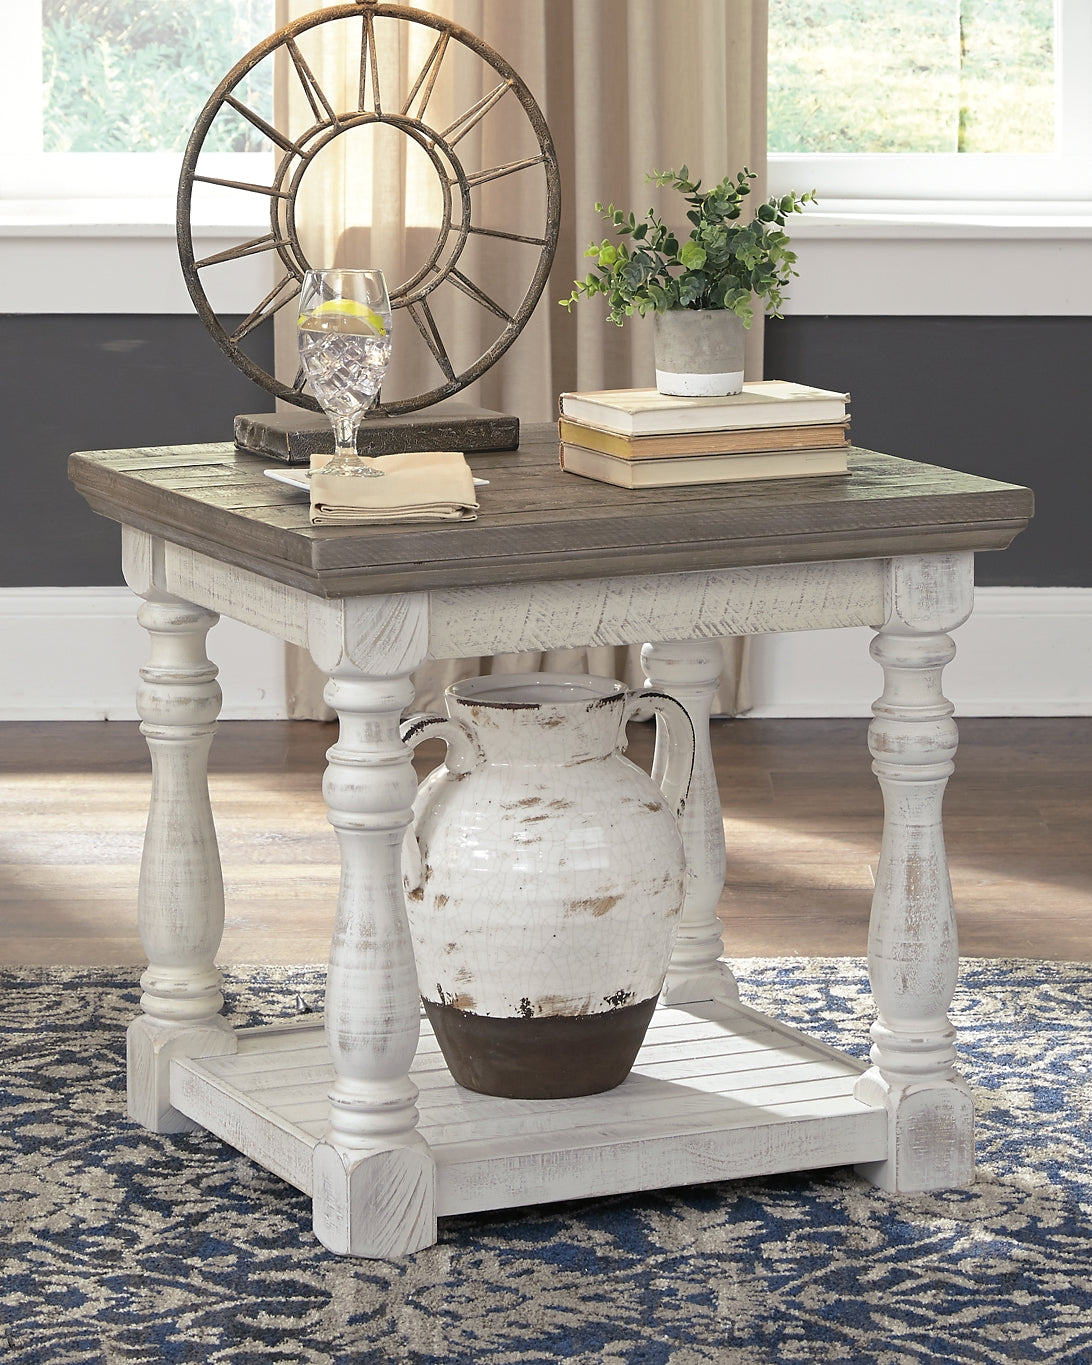 Havalance 2 End Tables at Walker Mattress and Furniture Locations in Cedar Park and Belton TX.